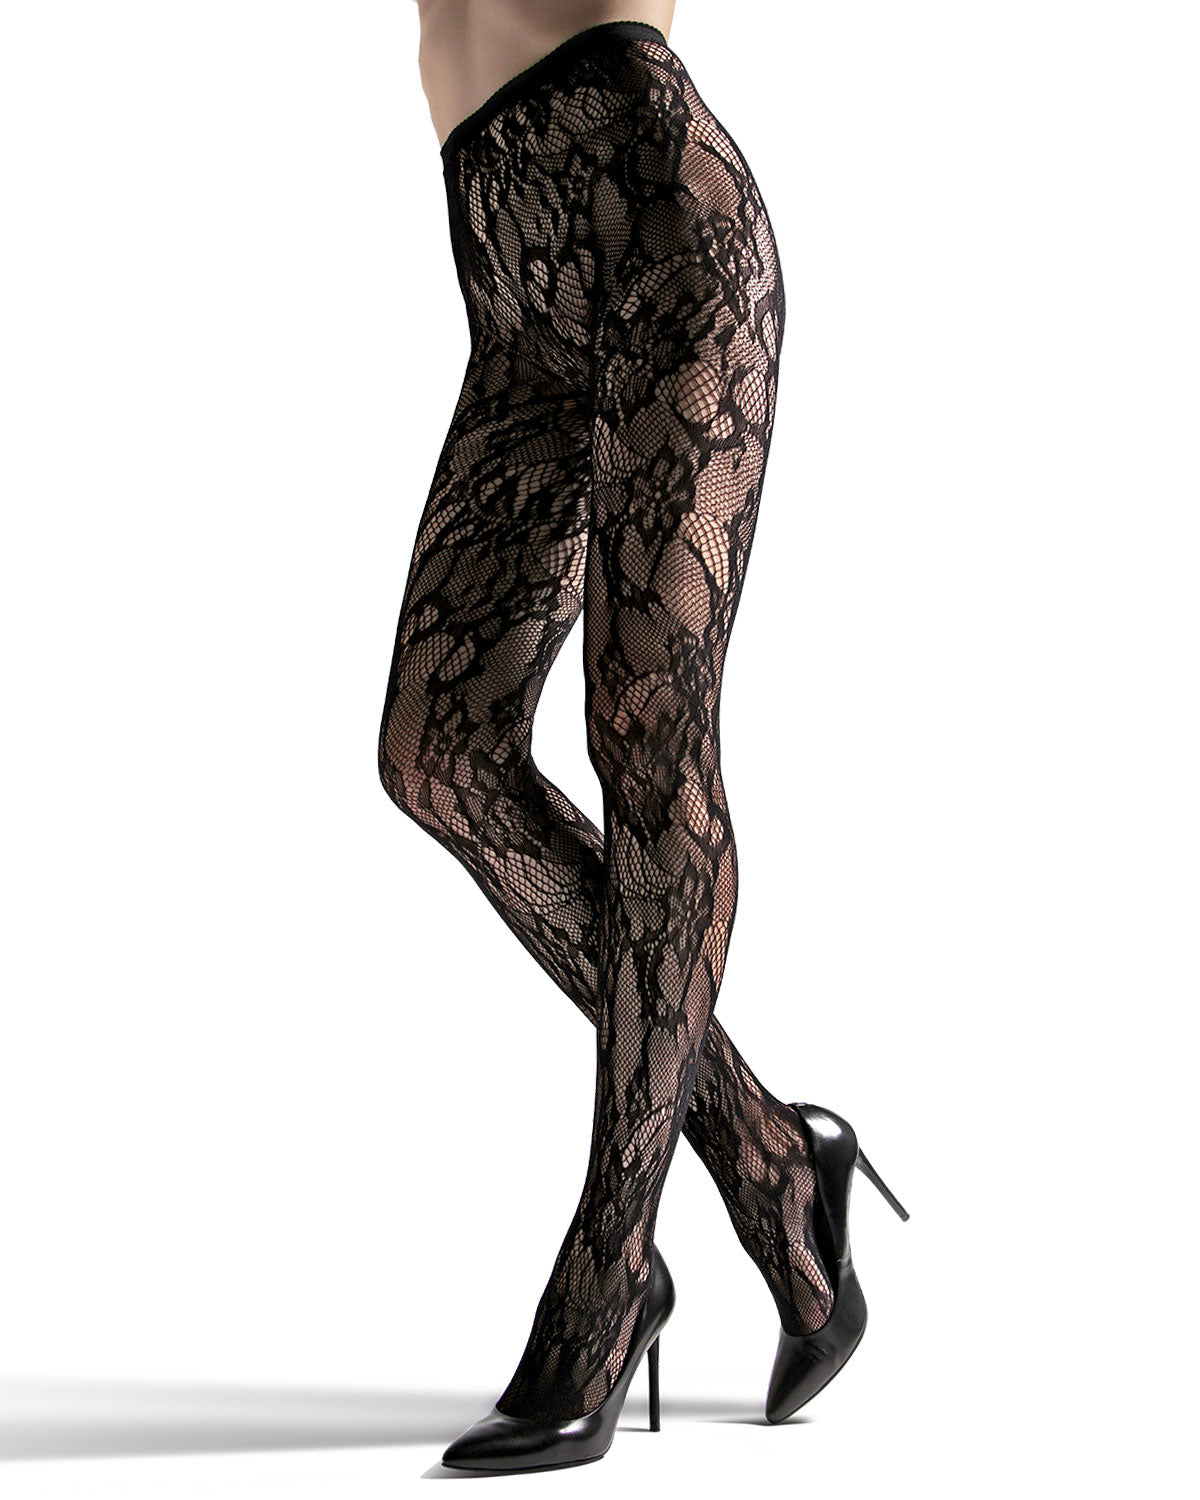 Floral Lace Cut-Out Fishnet Tights